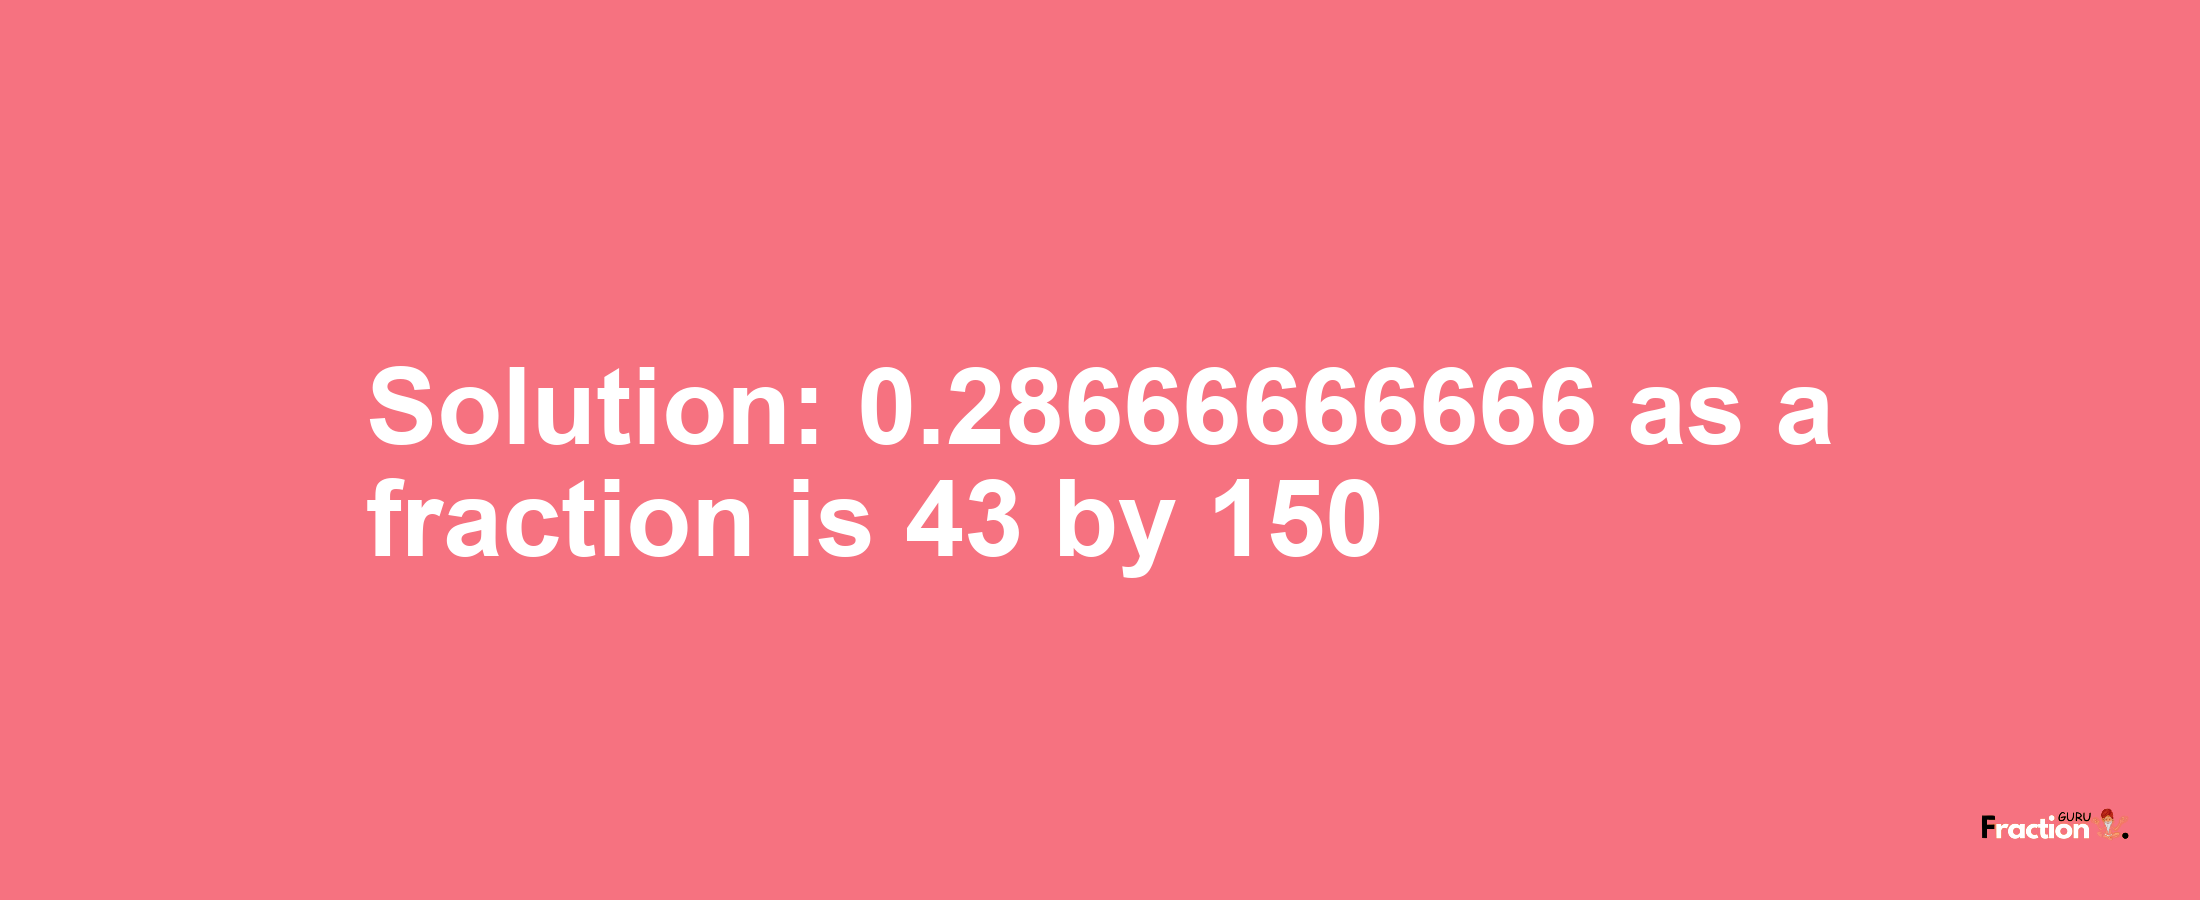 Solution:0.28666666666 as a fraction is 43/150